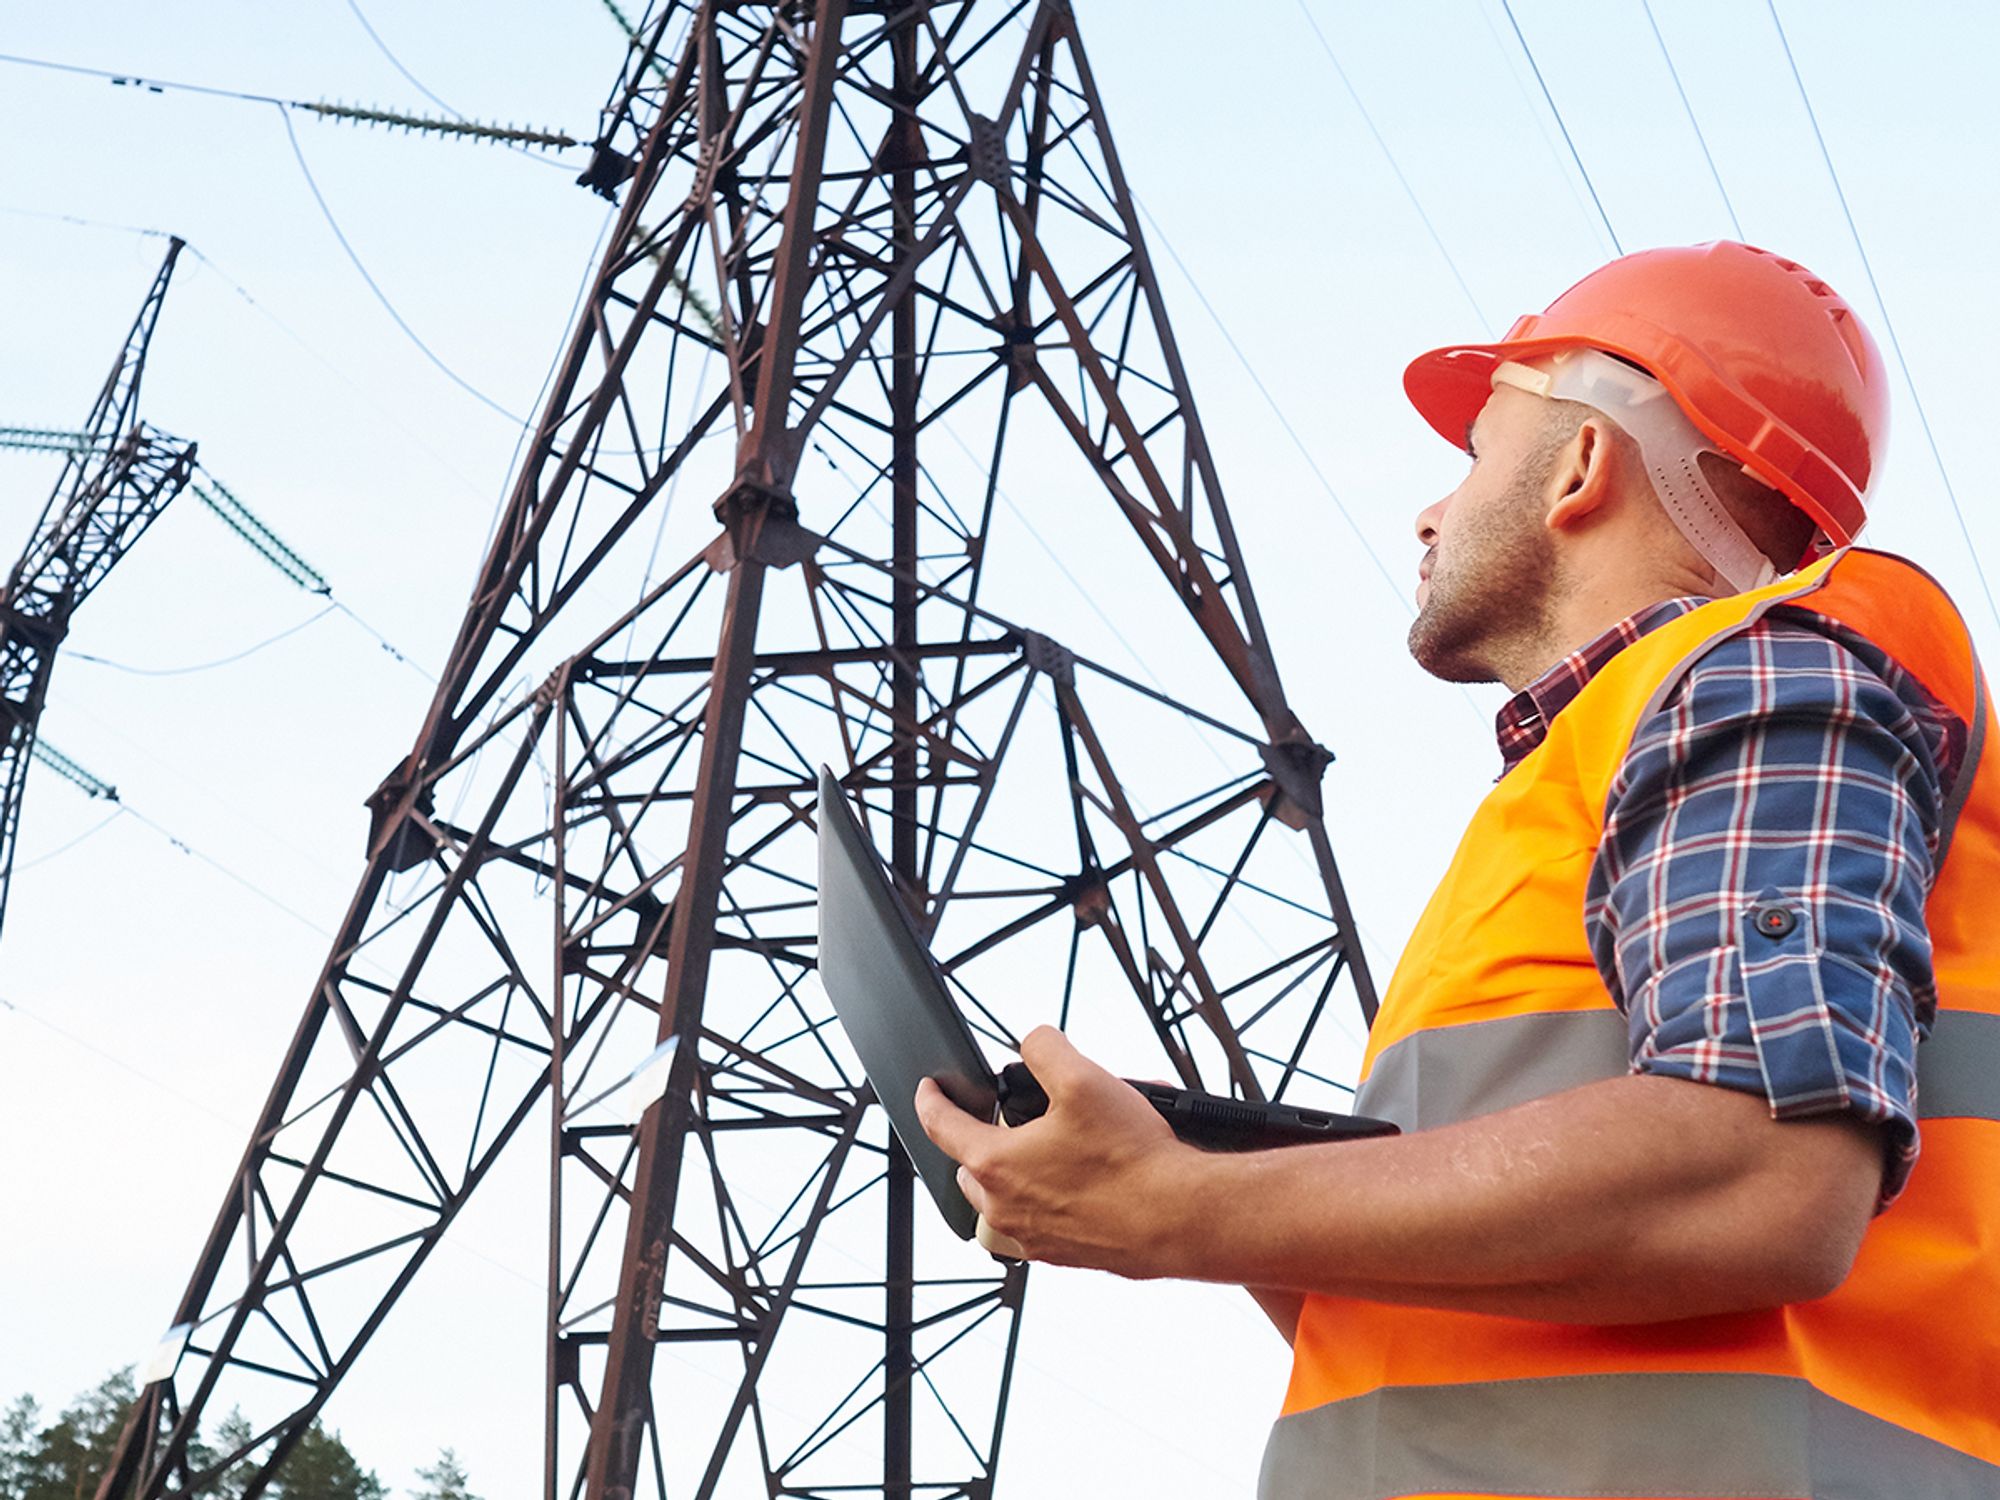 Know your role in protecting workers on communication towers